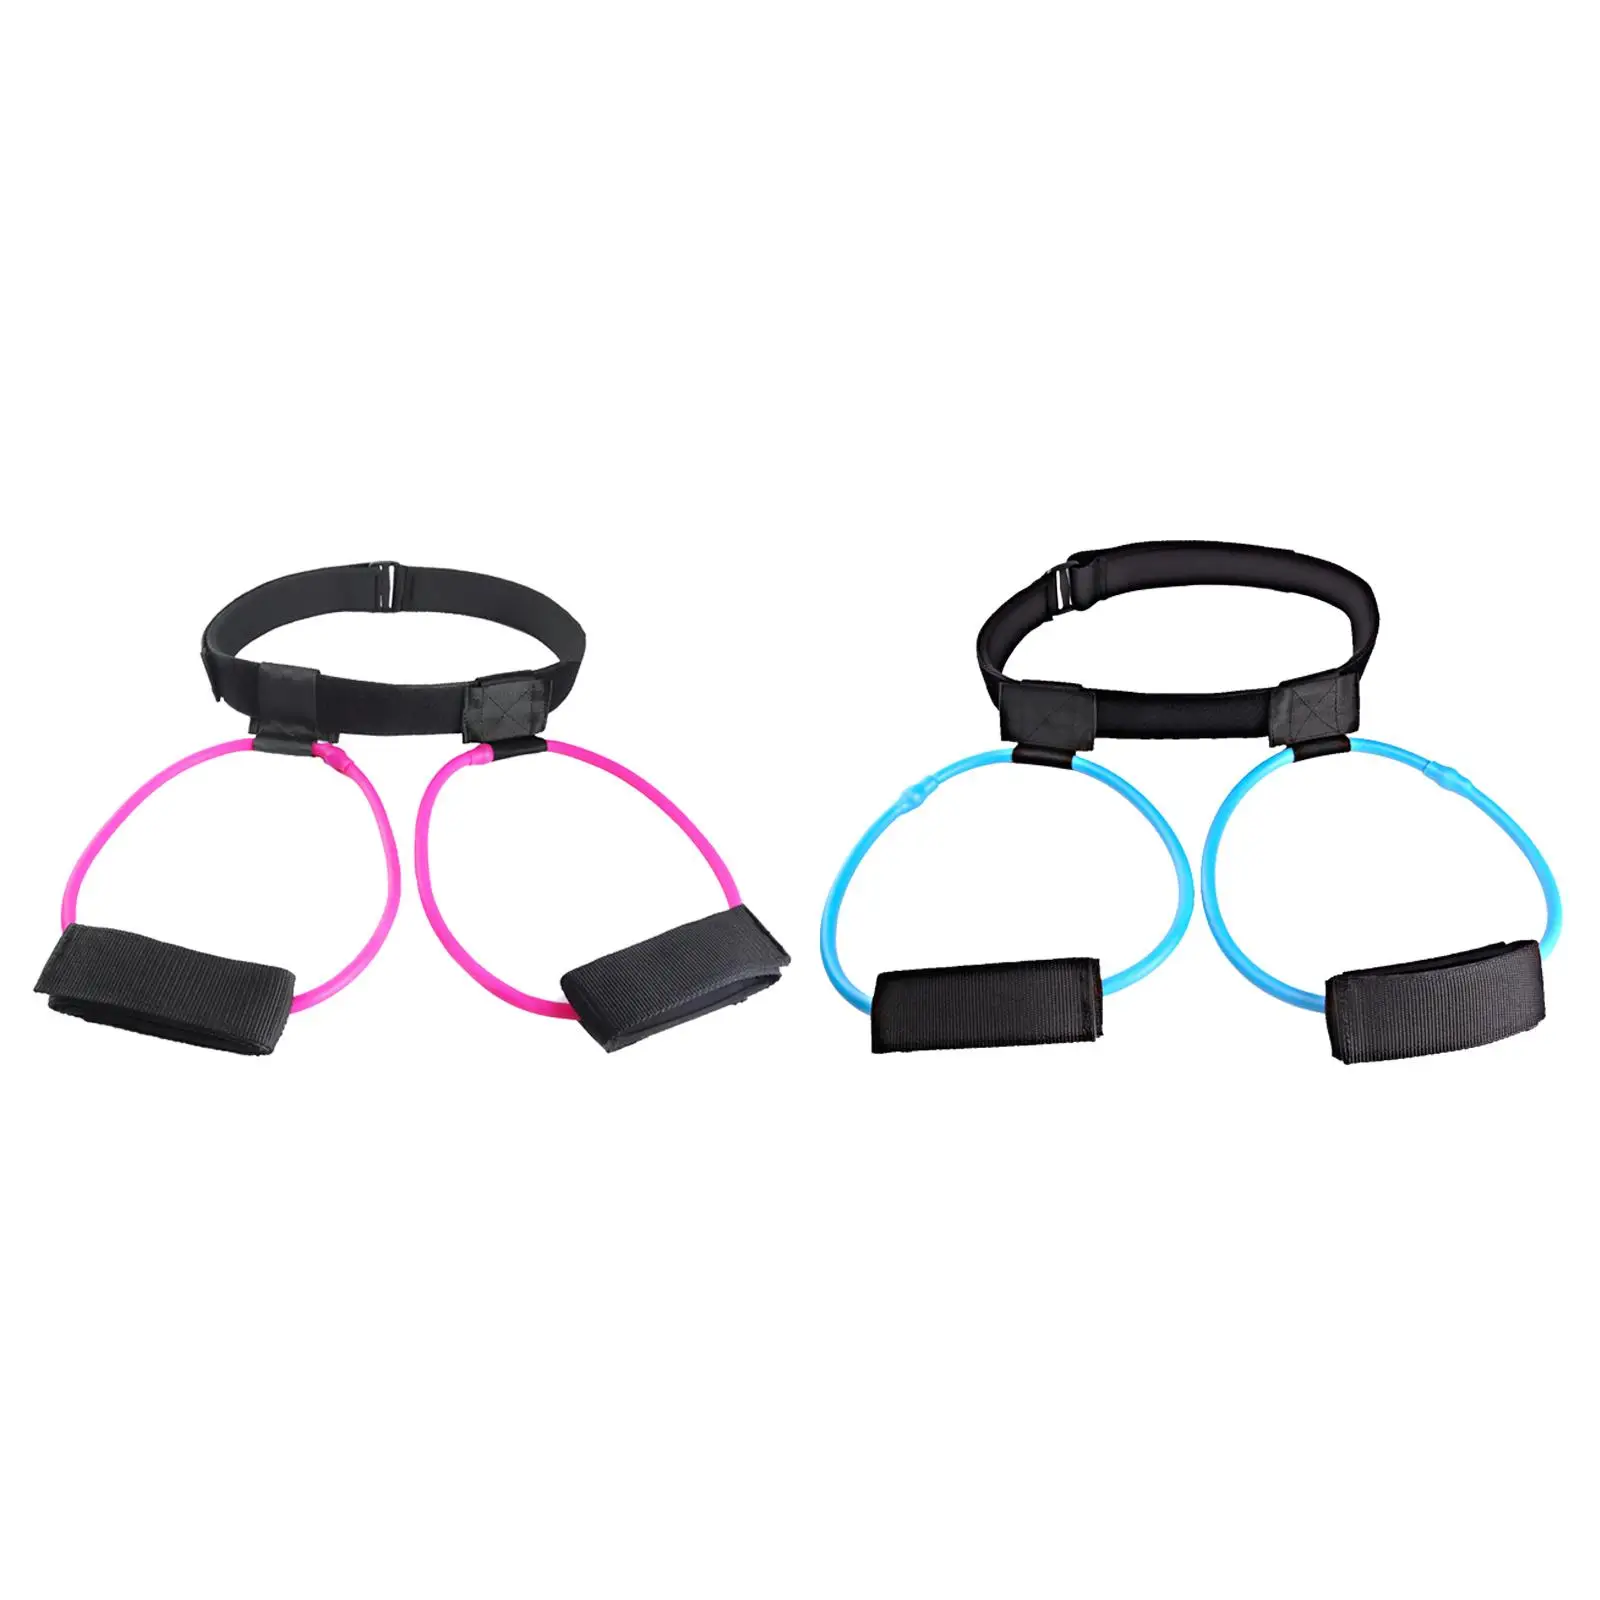 Fitness Booty Bands Bounce Trainer Elastic Pull Rope Squat Resistance Bands Adjust Waist Belt Leg Strength Agility Training